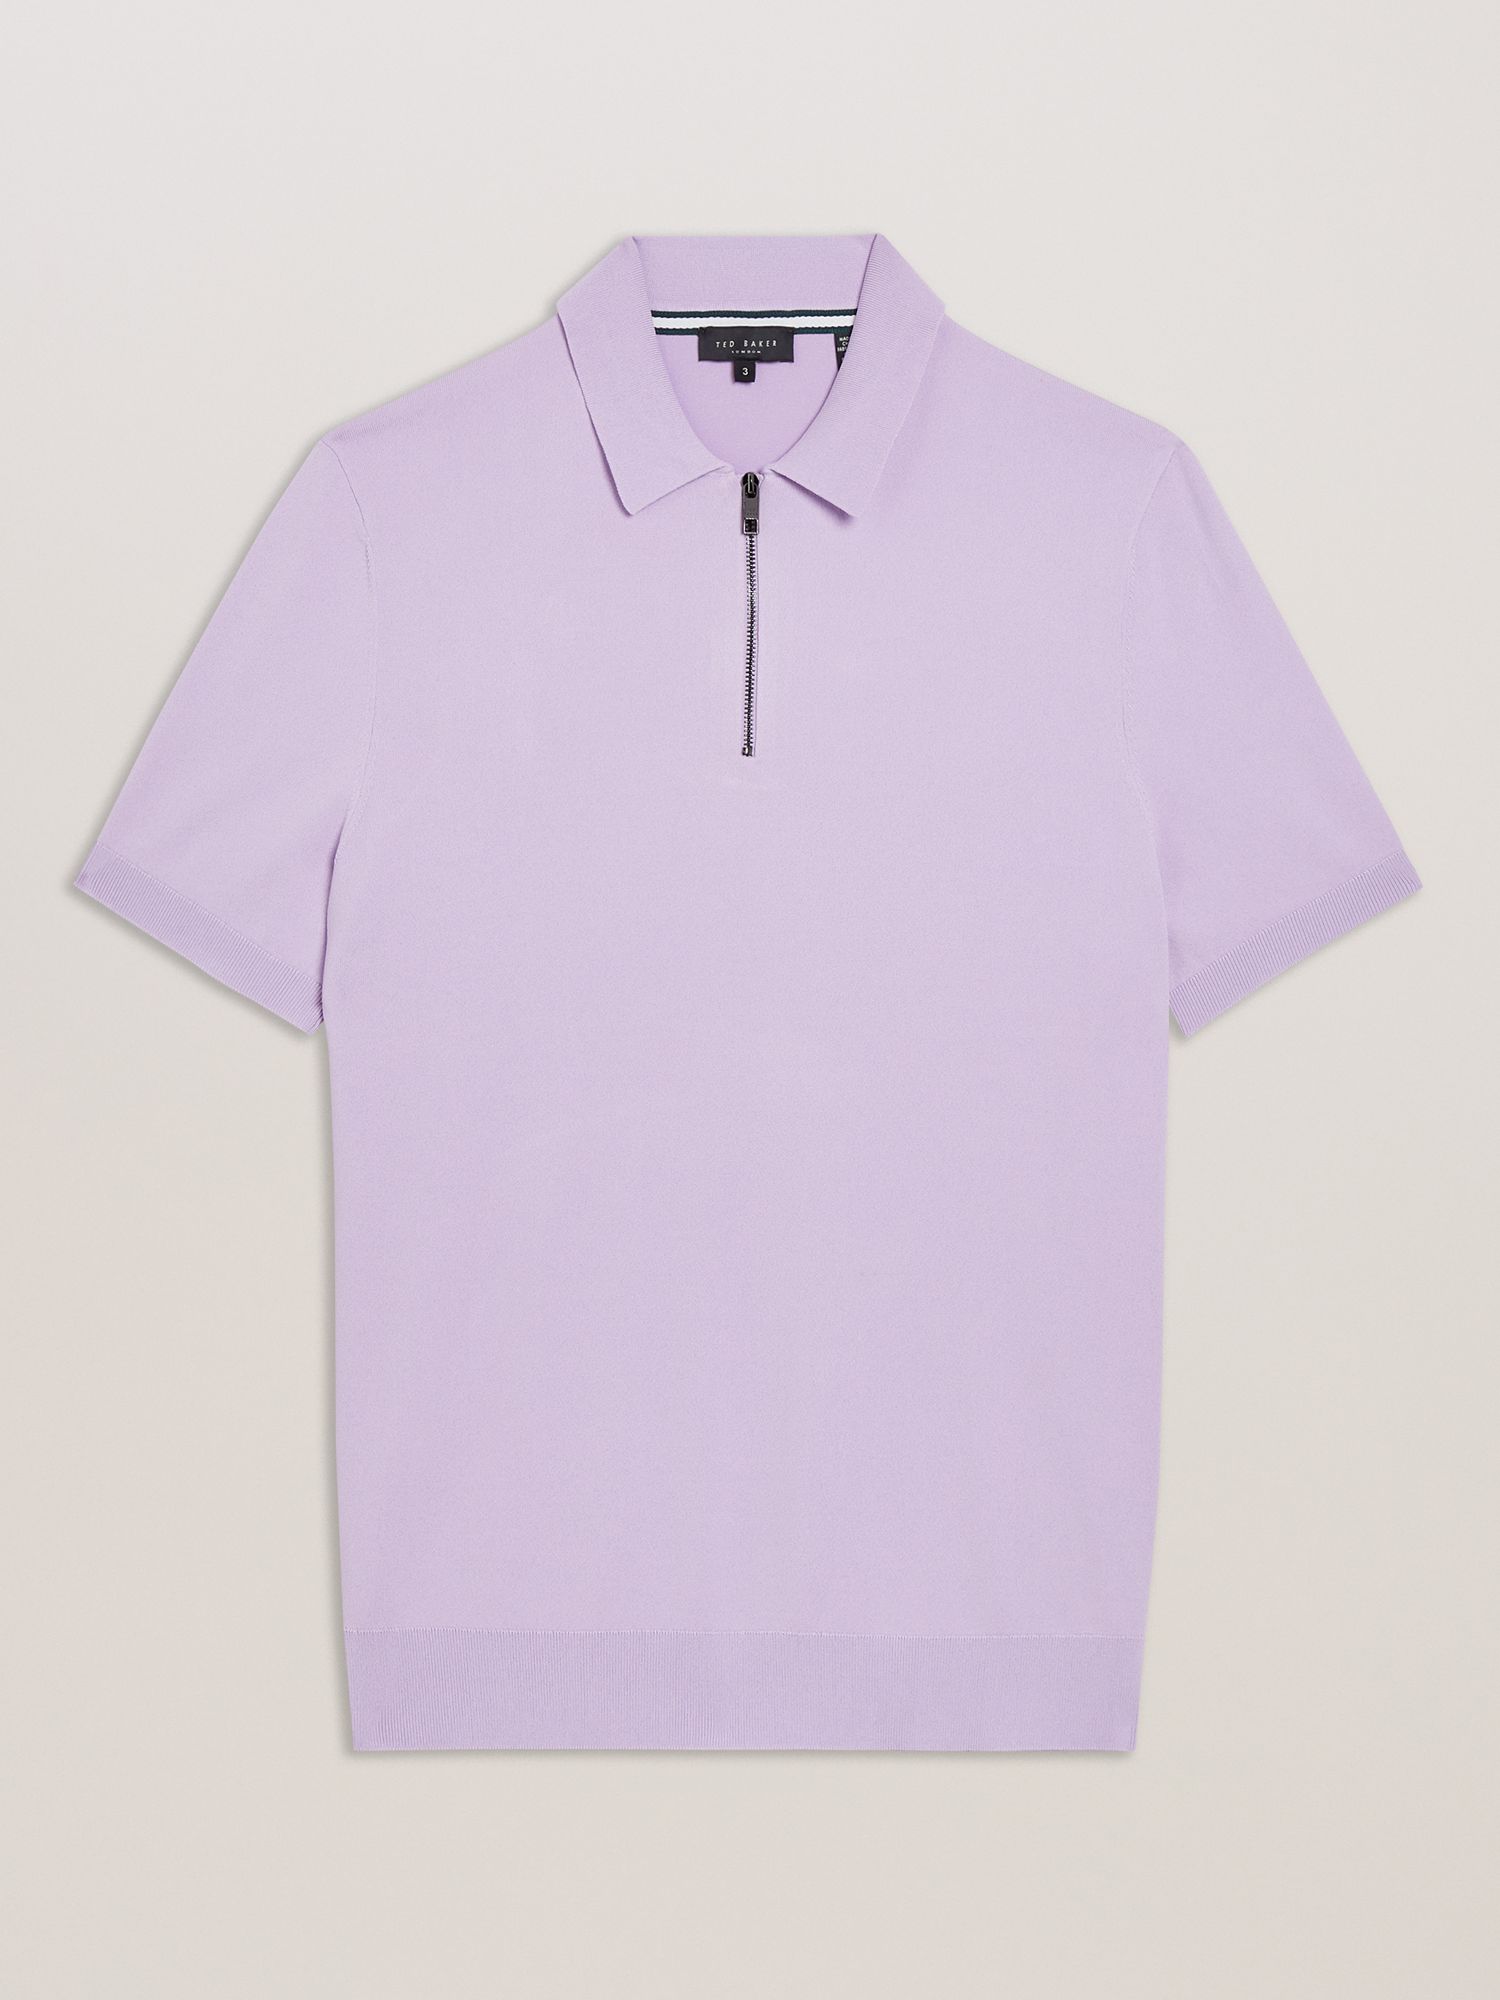 Ted Baker Daldin Short Sleeve Zip Polo Top, Lilac, L